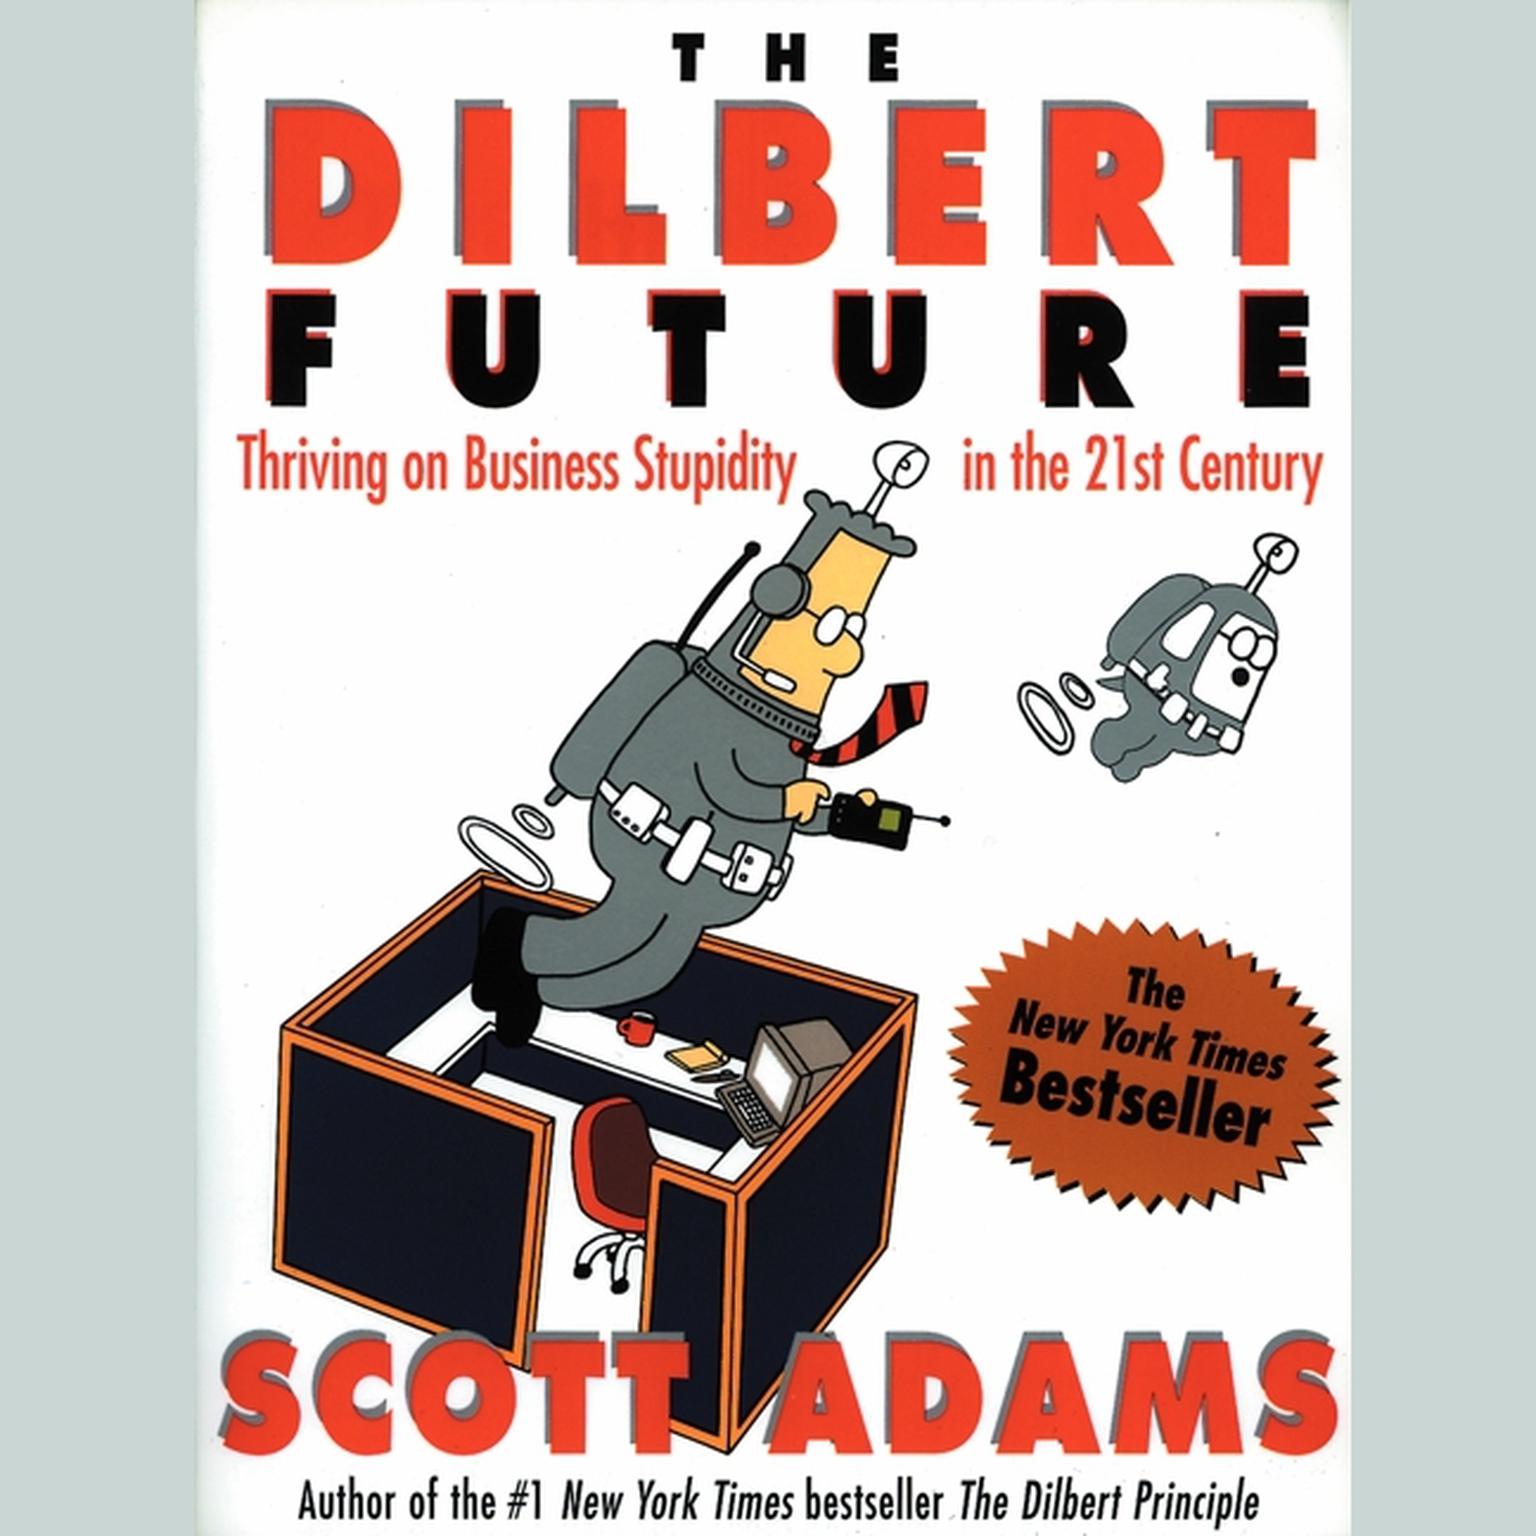 DILBERT FUTURE (Abridged): Thriving on Business Stupidity in the 21st Century Audiobook, by Scott Adams